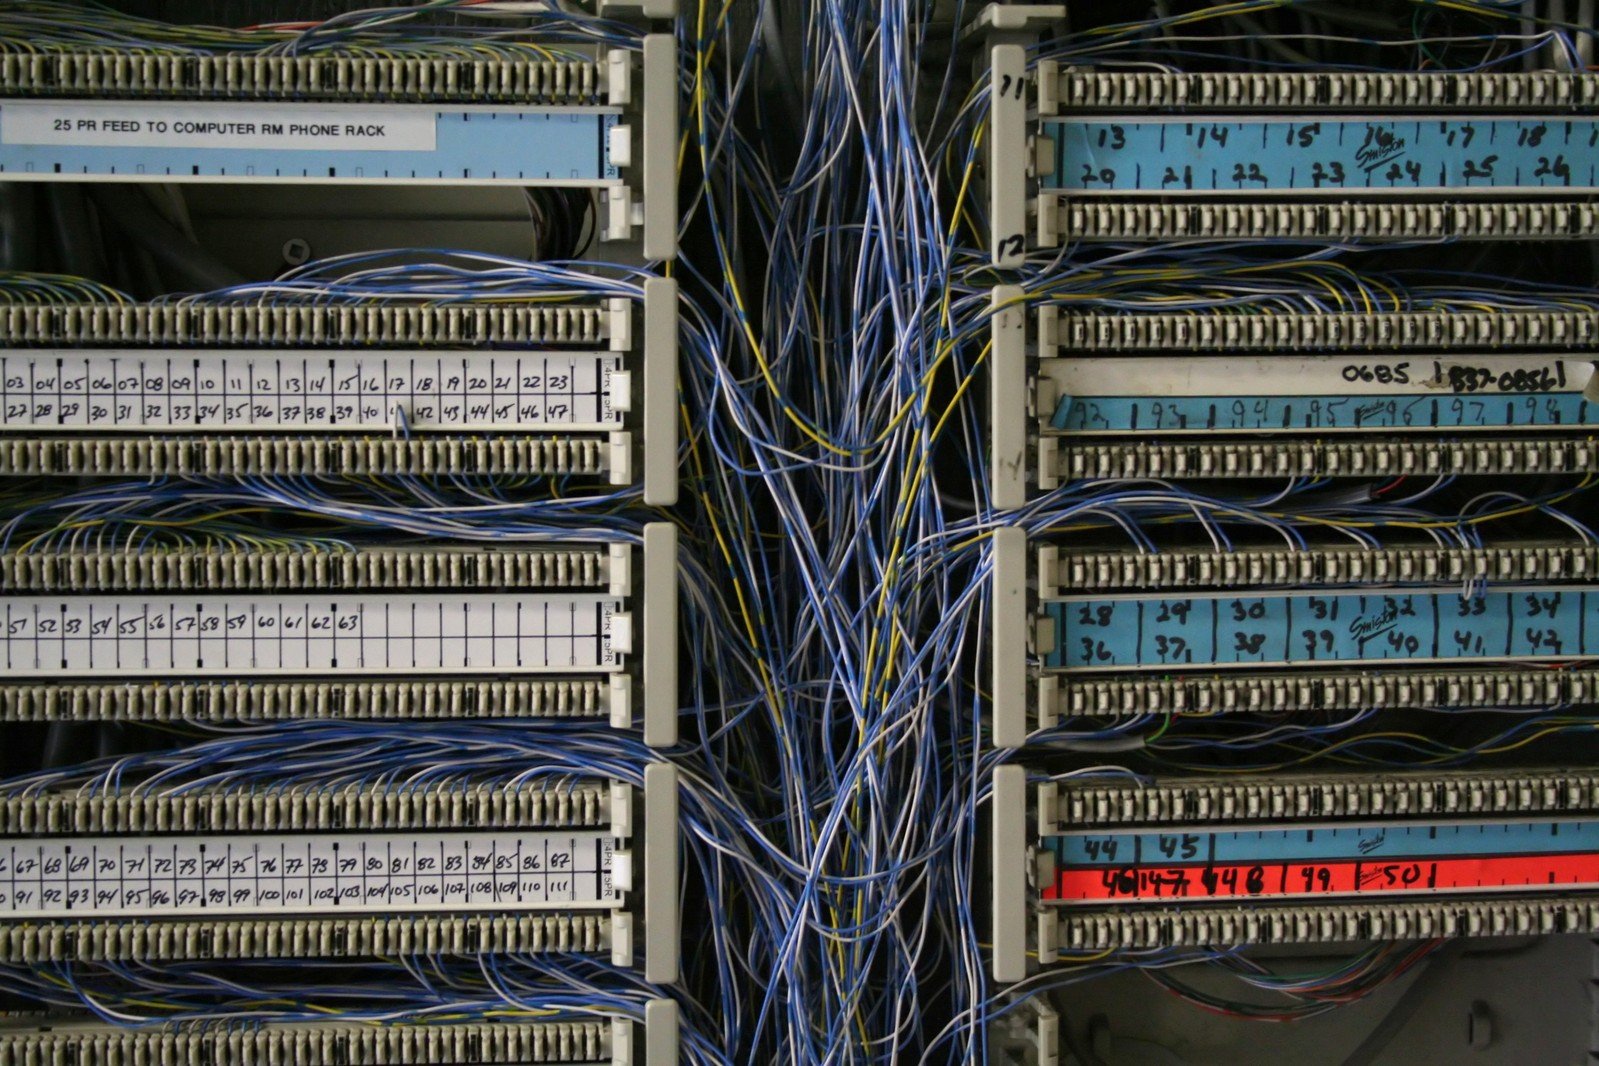 many wires and connectors are connected to wires on the inside of a server